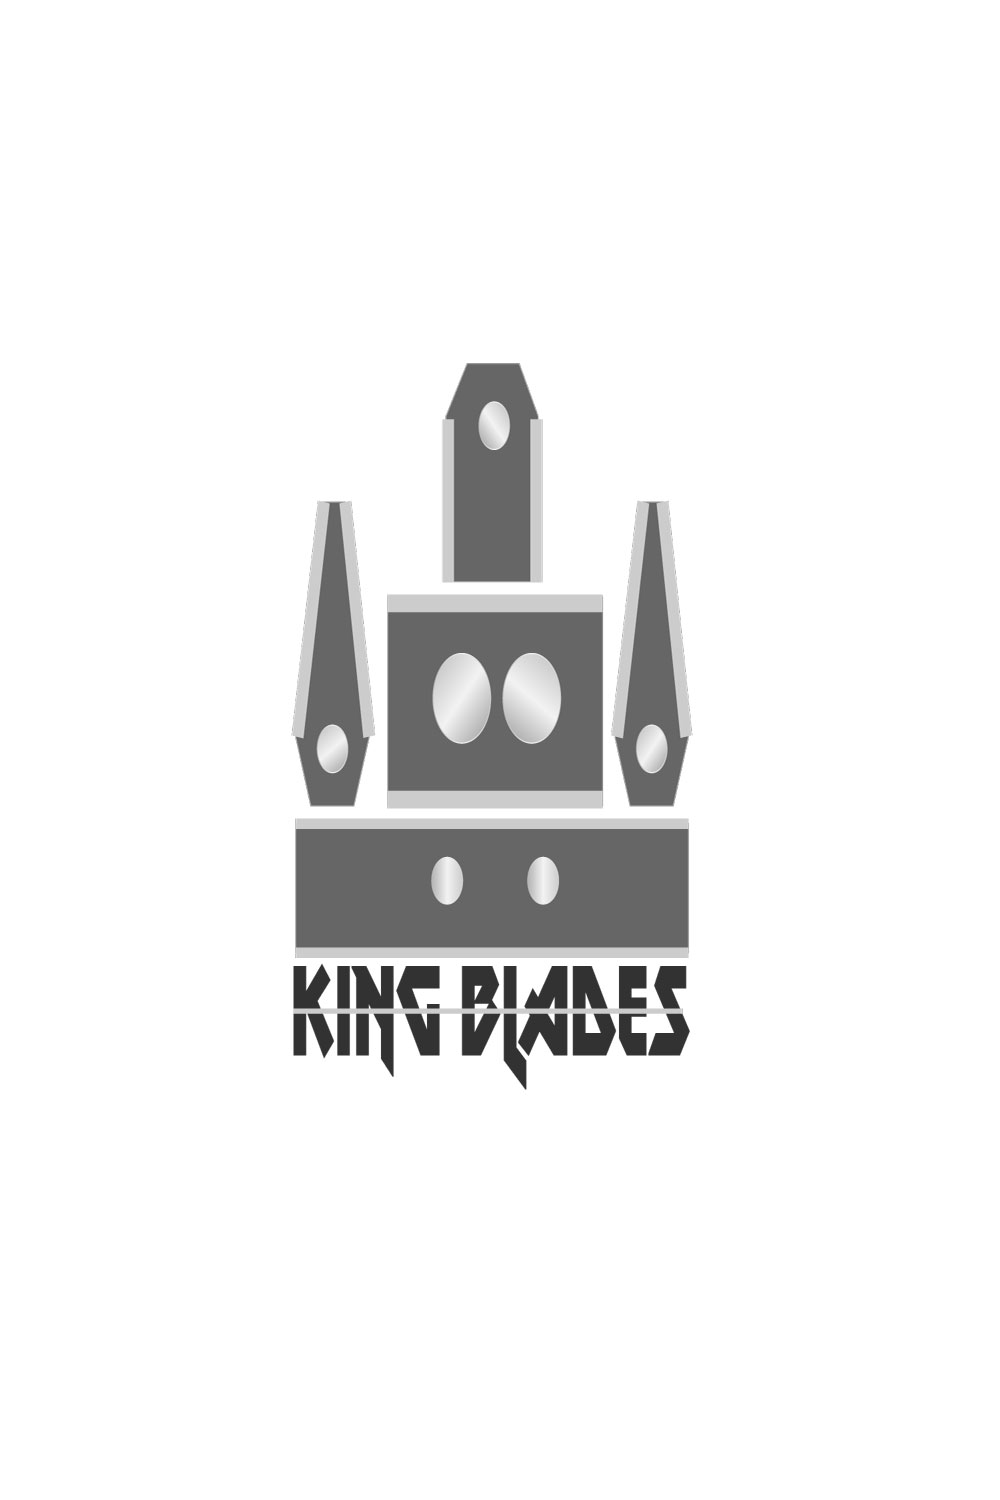 King Blades - TShirt Graphic Design pinterest preview image.